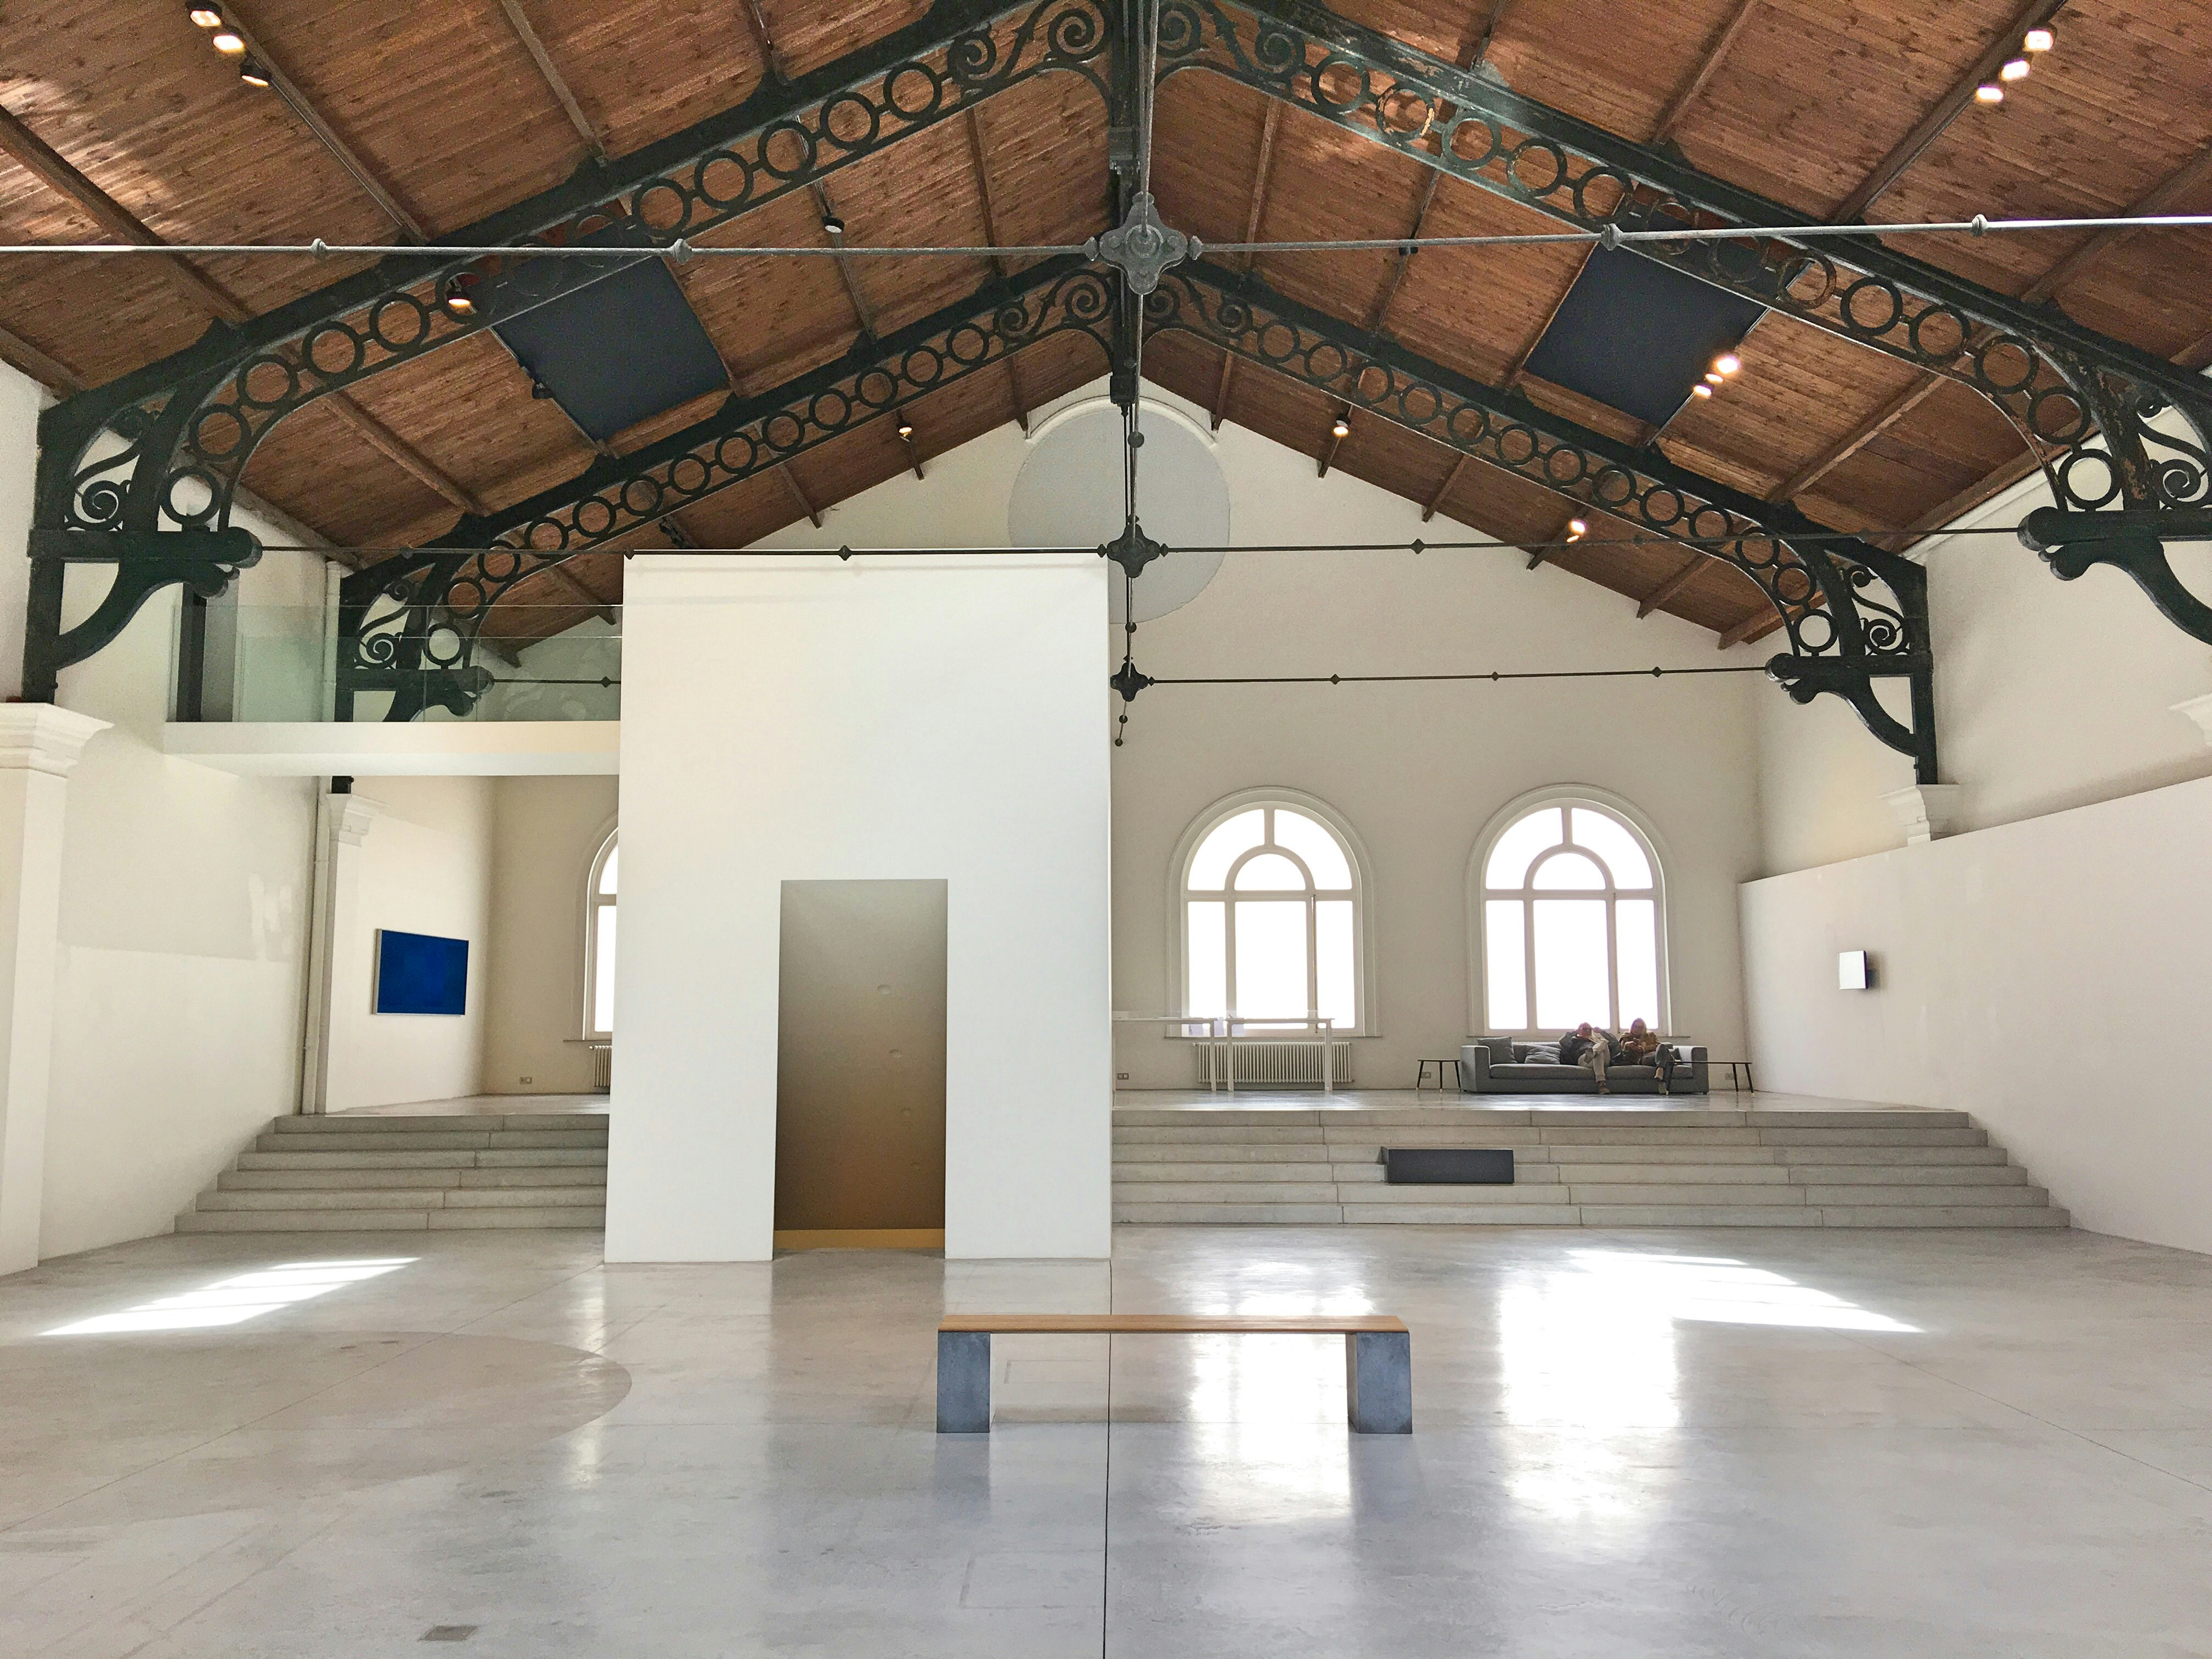 A large white room under a sloping wooden roof supported by handsome iron girders; in the middle of the room is a bench, with what looks like a freestanding doorway behind it; at the rear of the room, steps lead up to arched windows.